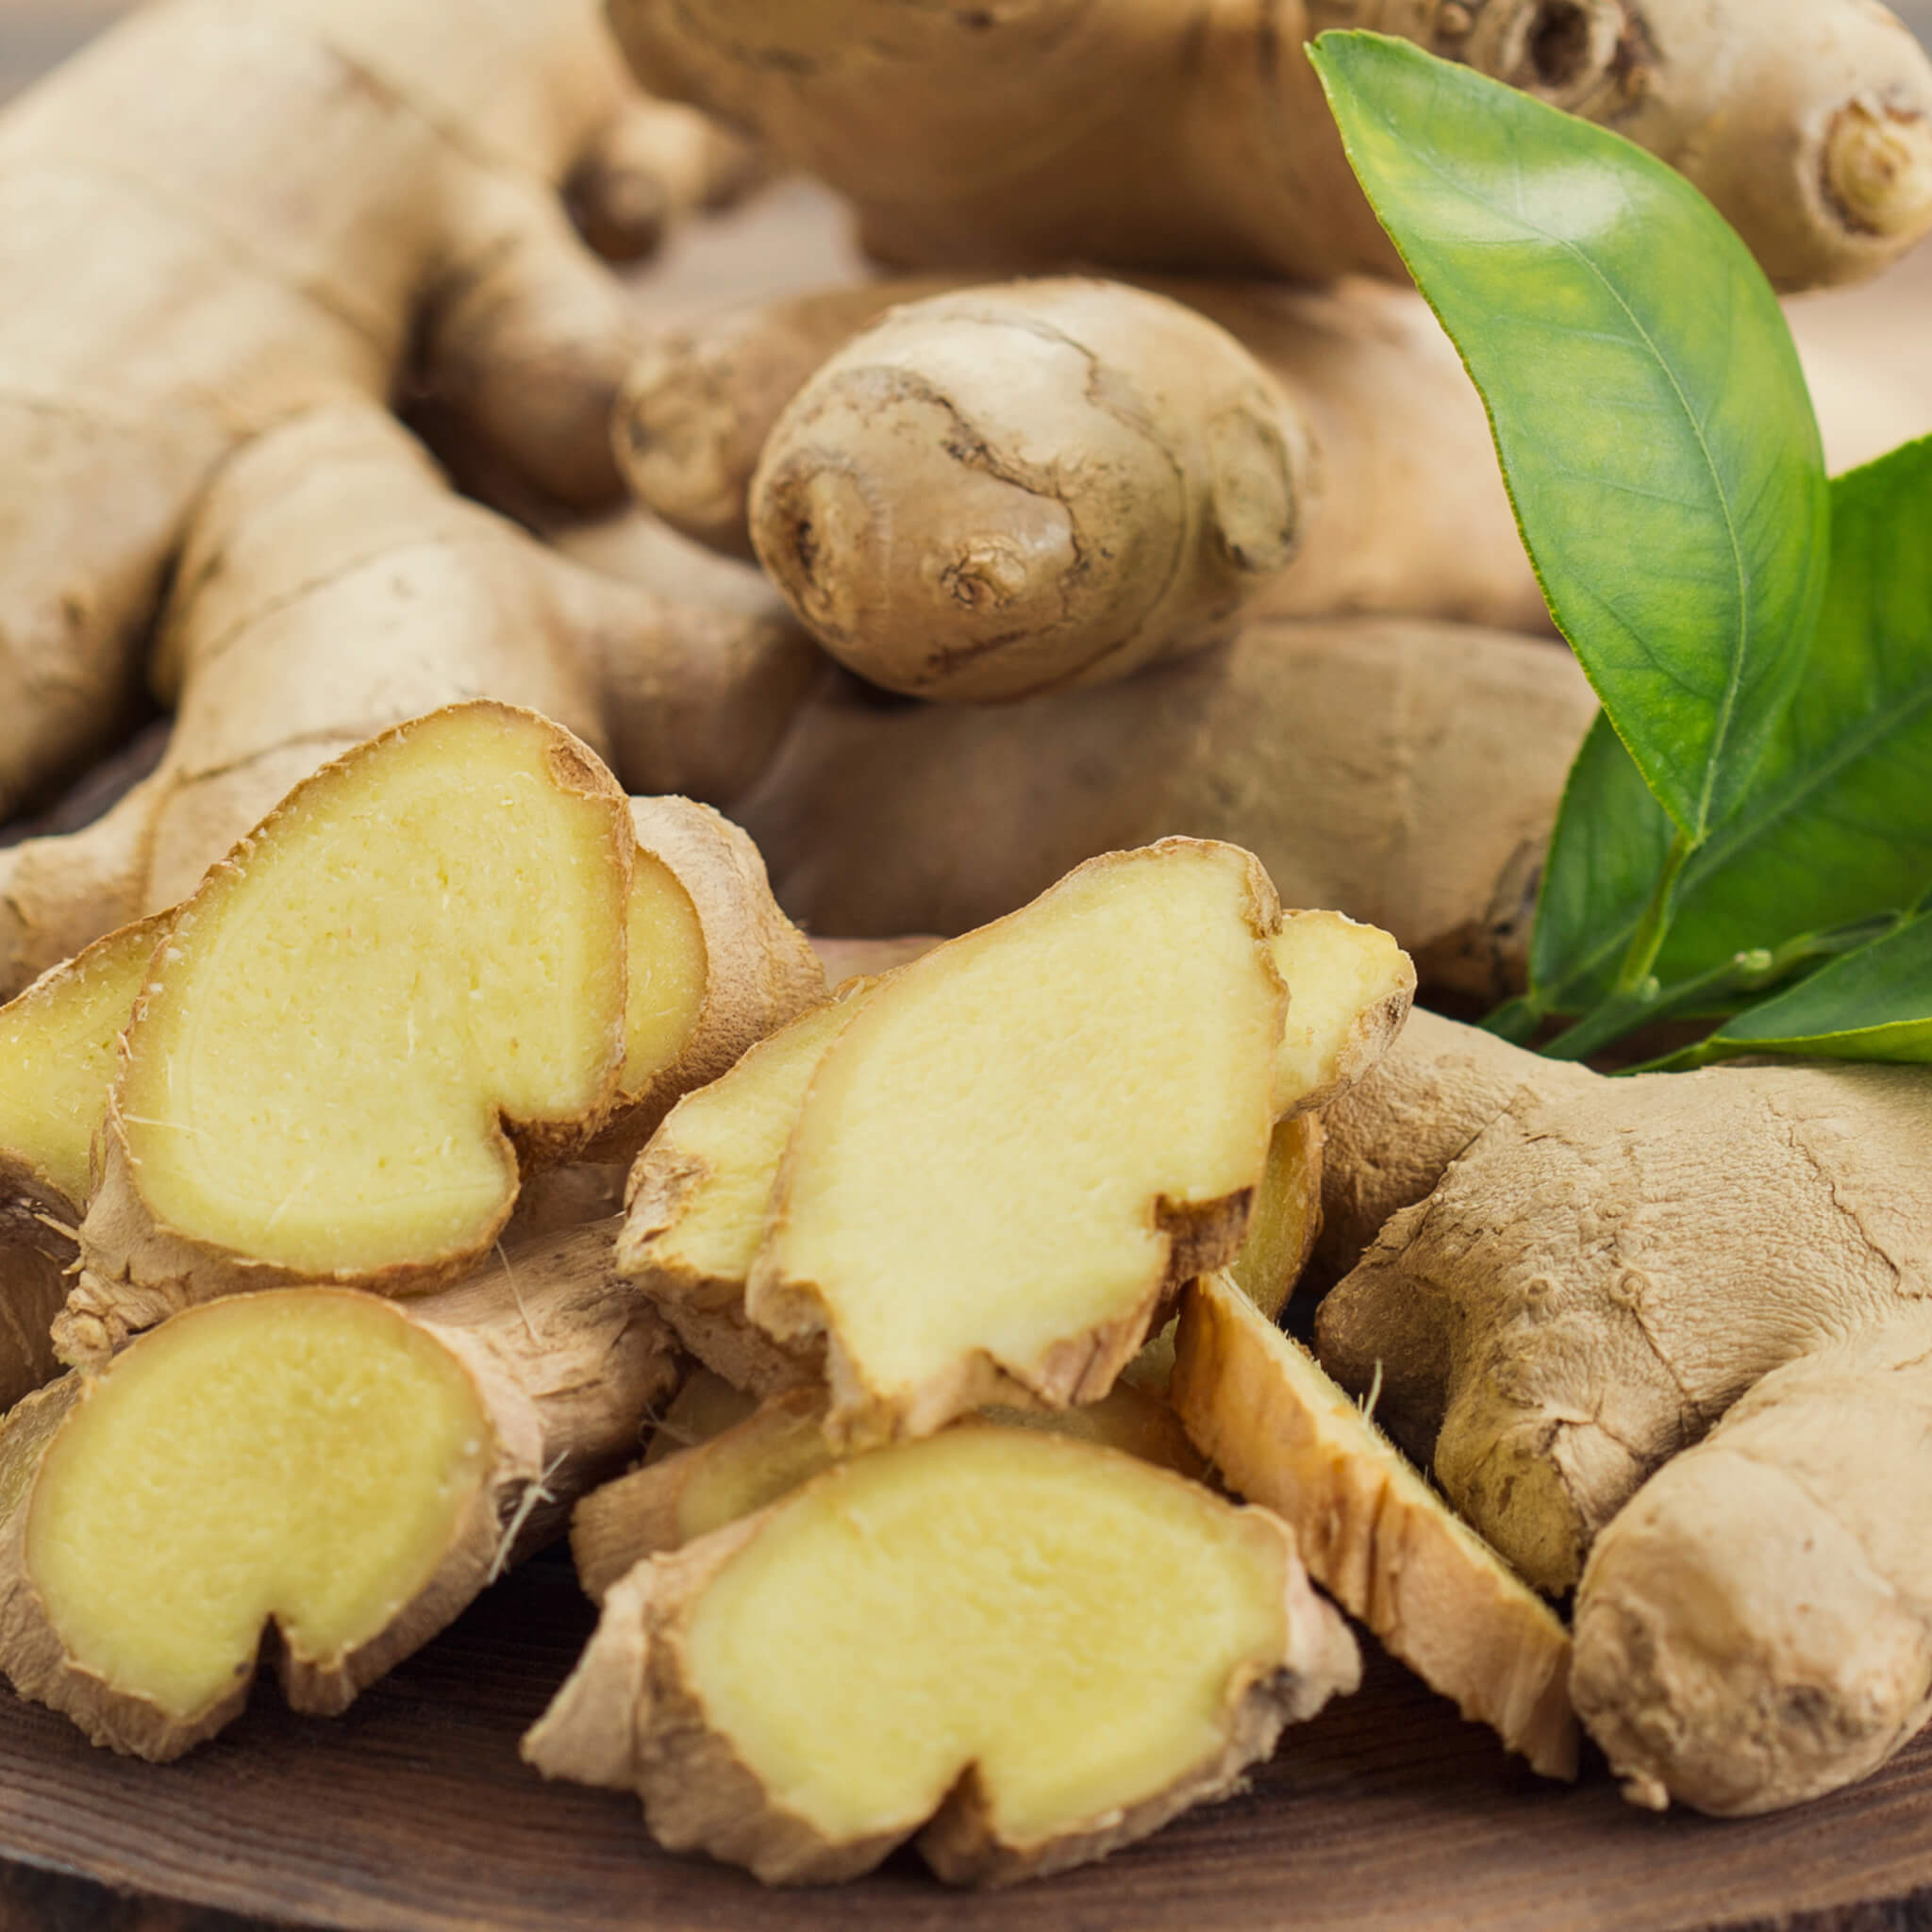 Product Page Key Ingredients: Ginger